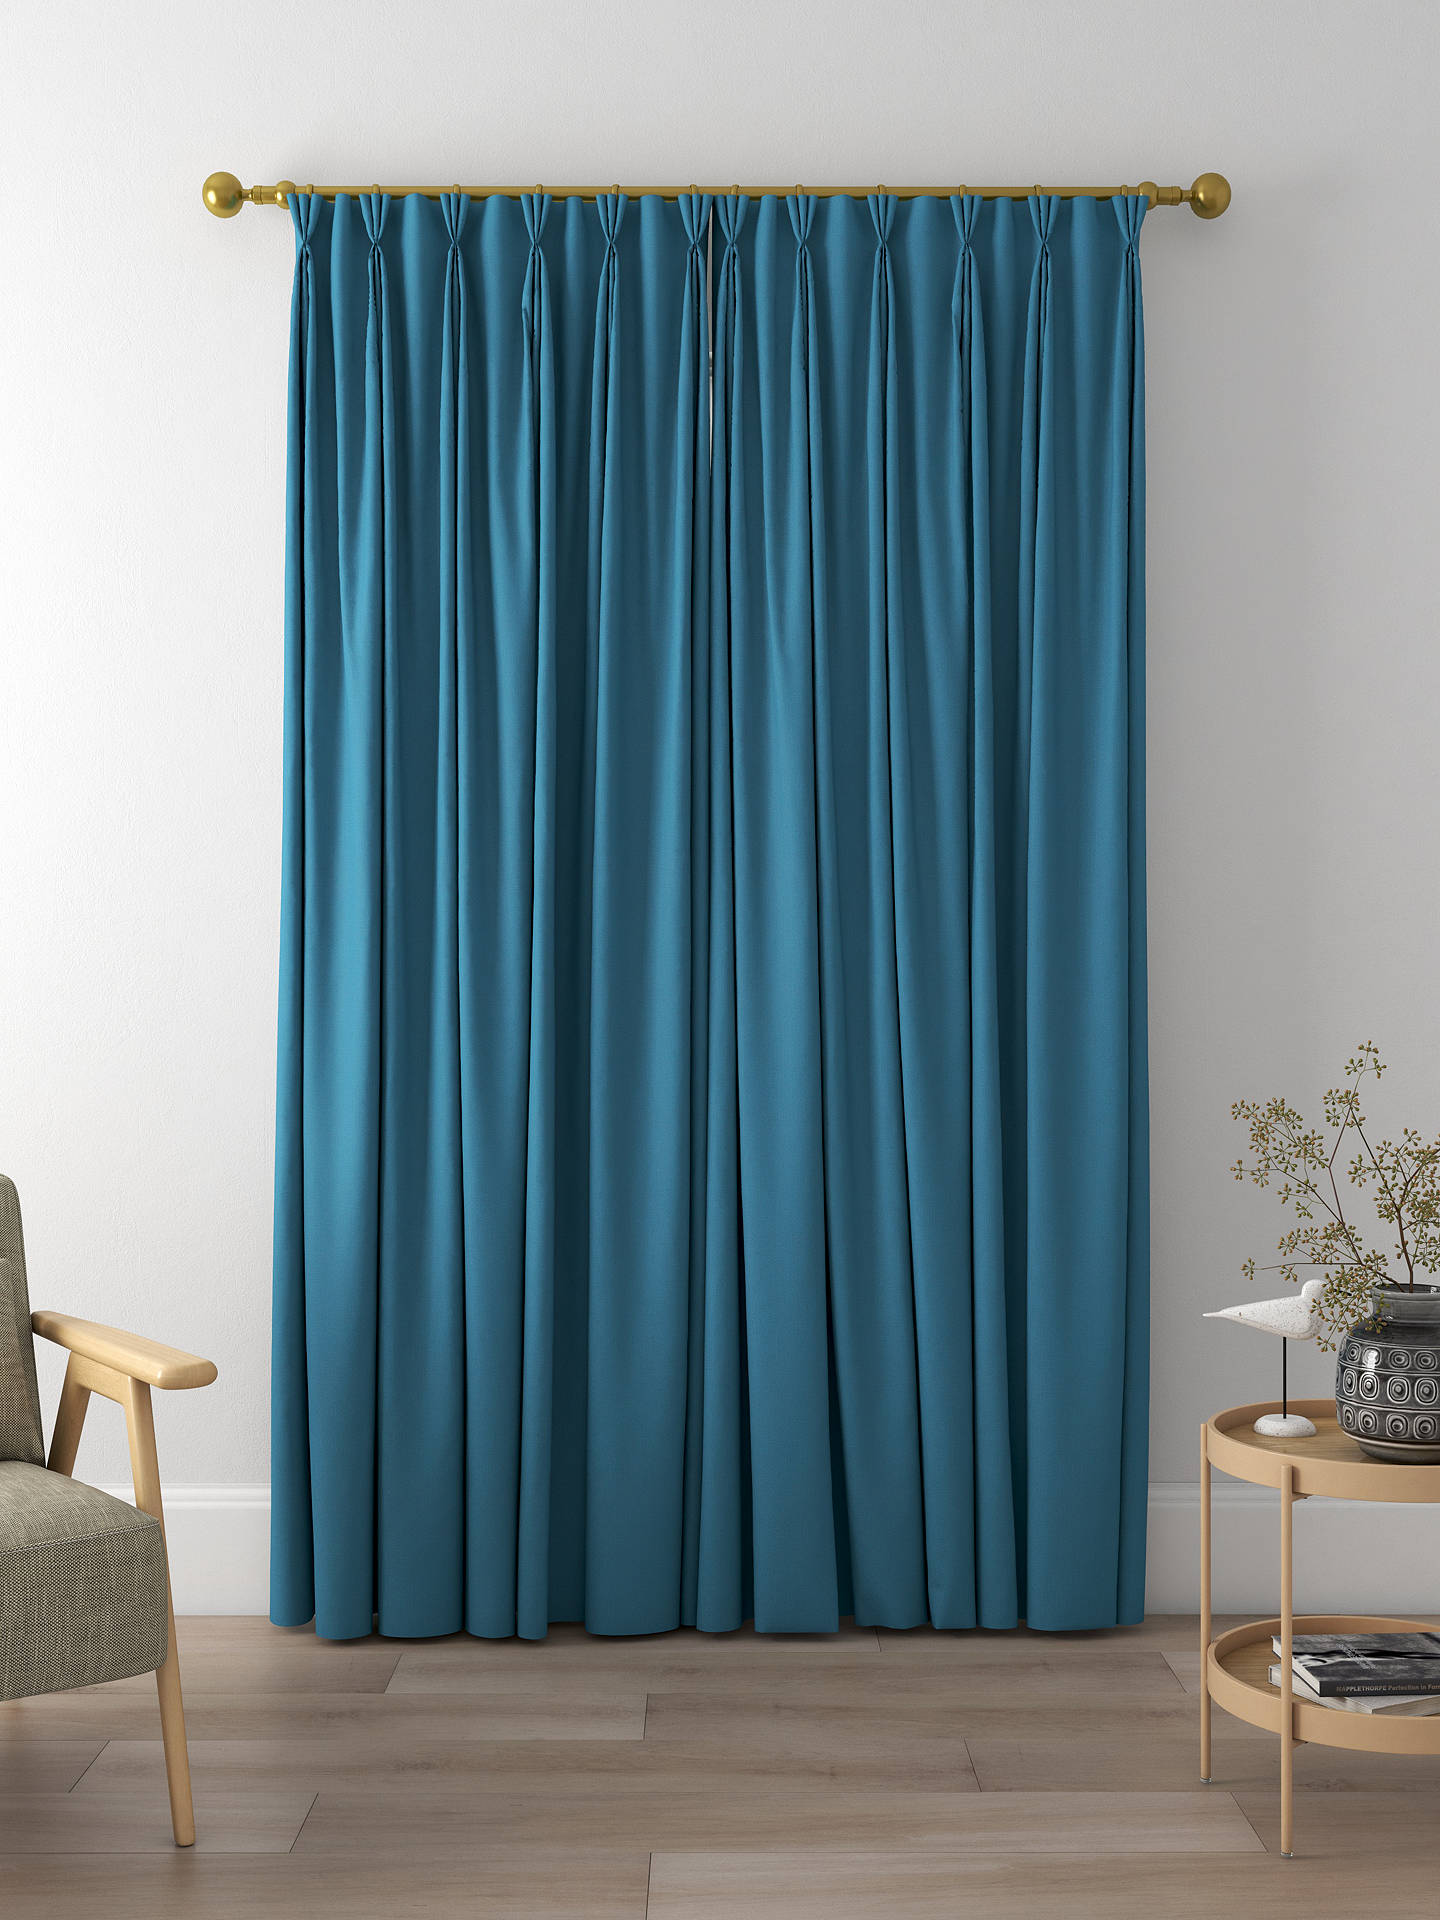 Sanderson Tuscany II Made to Measure Curtains, Cobalt